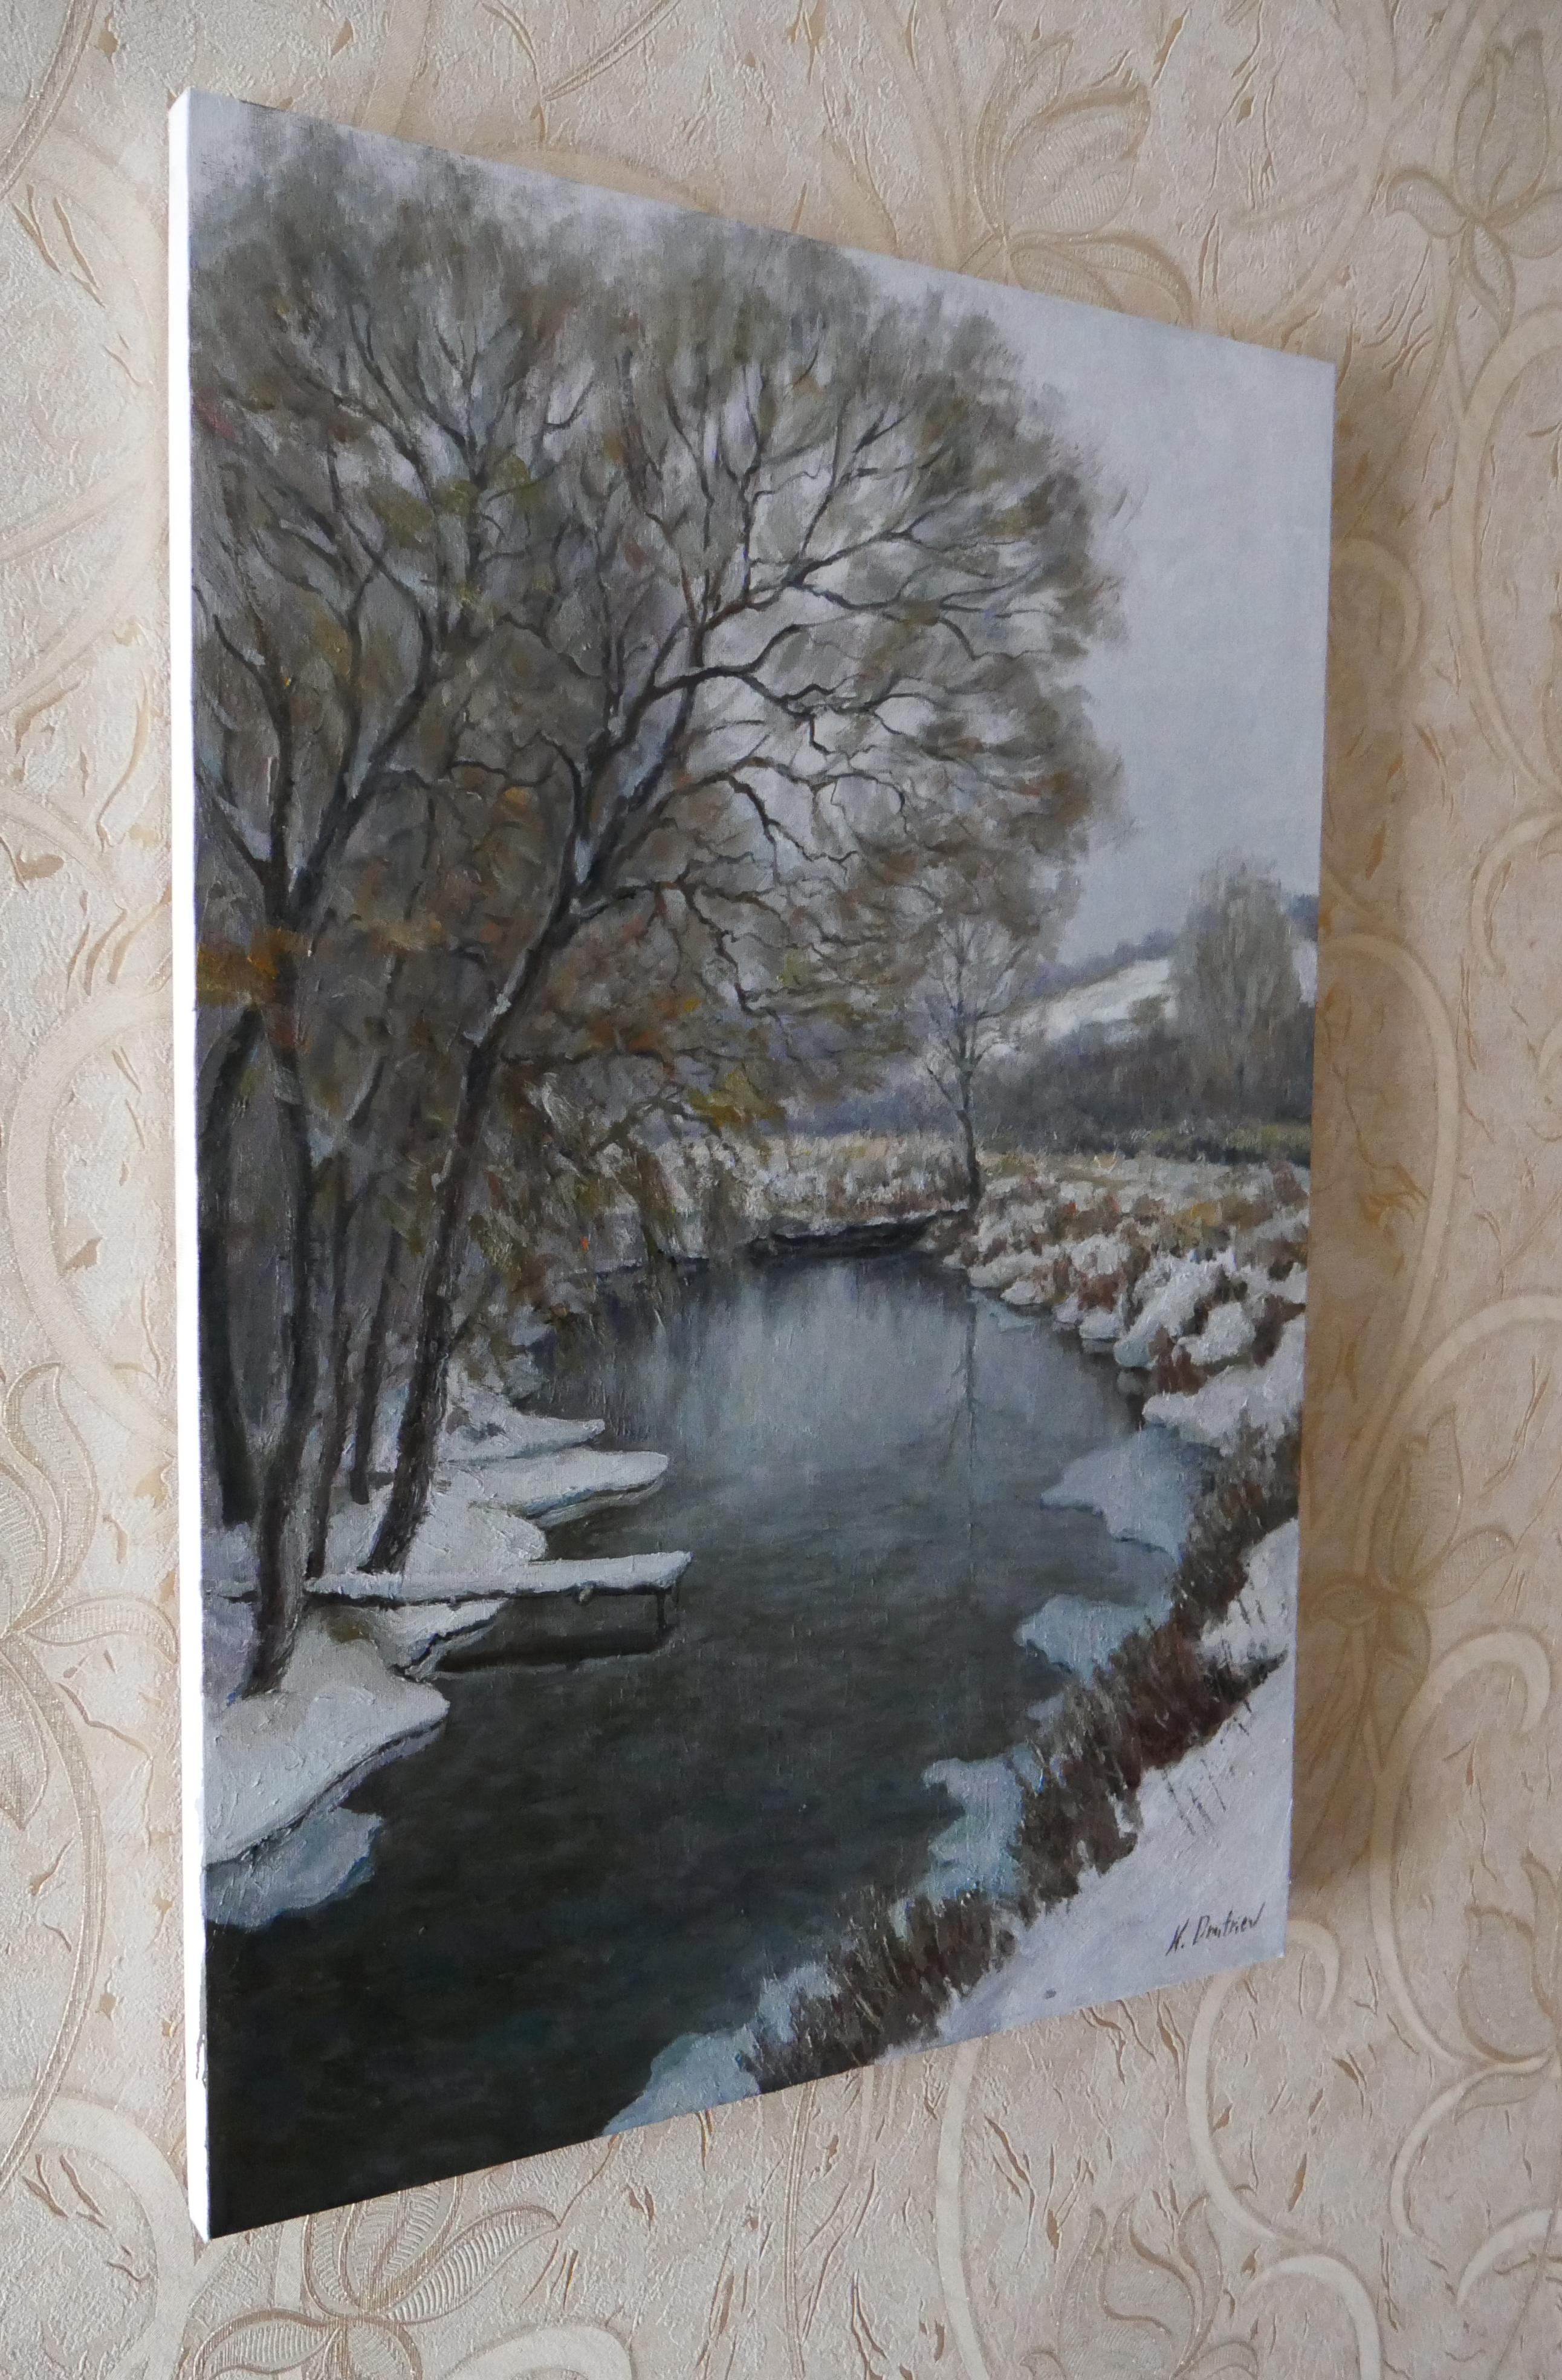 The Cold Winter River - winter landscape painting - Realist Painting by Nikolay Dmitriev